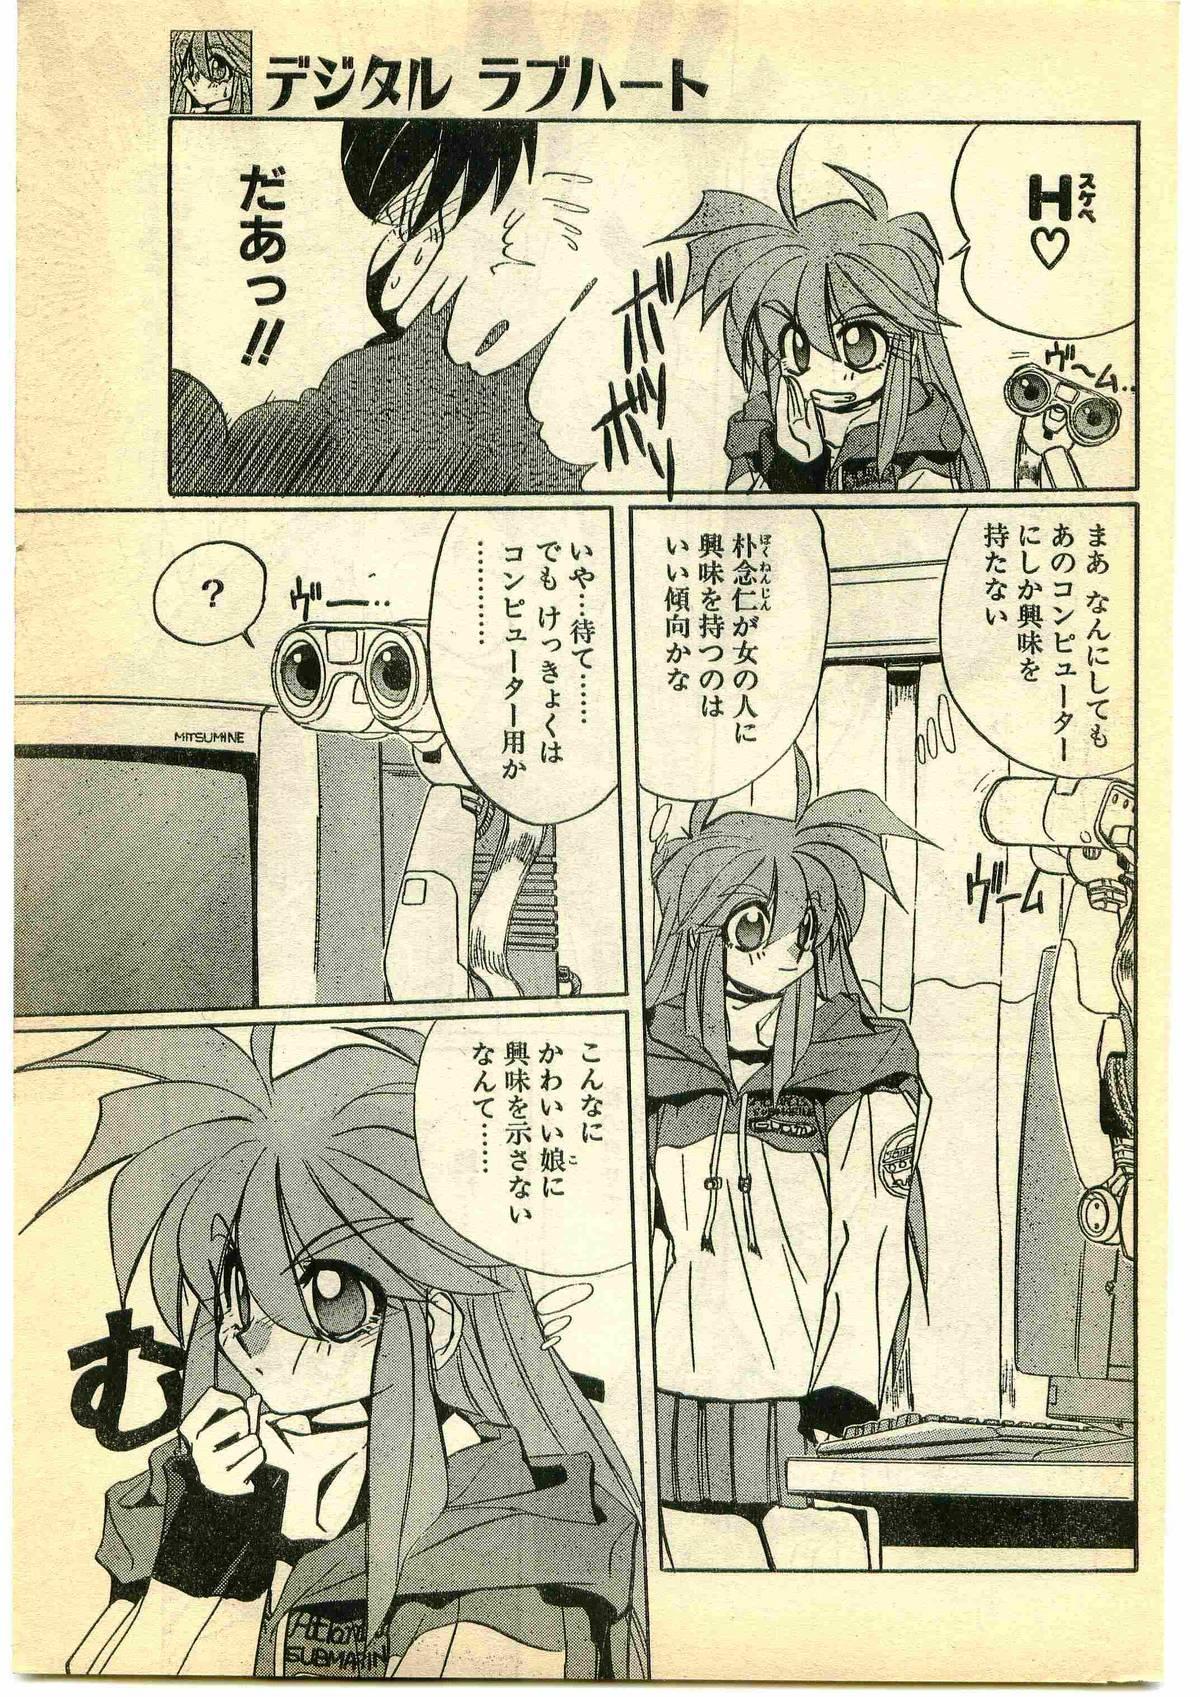 The COMIC Papipo Gaiden 1995-05 Nudes - Page 9